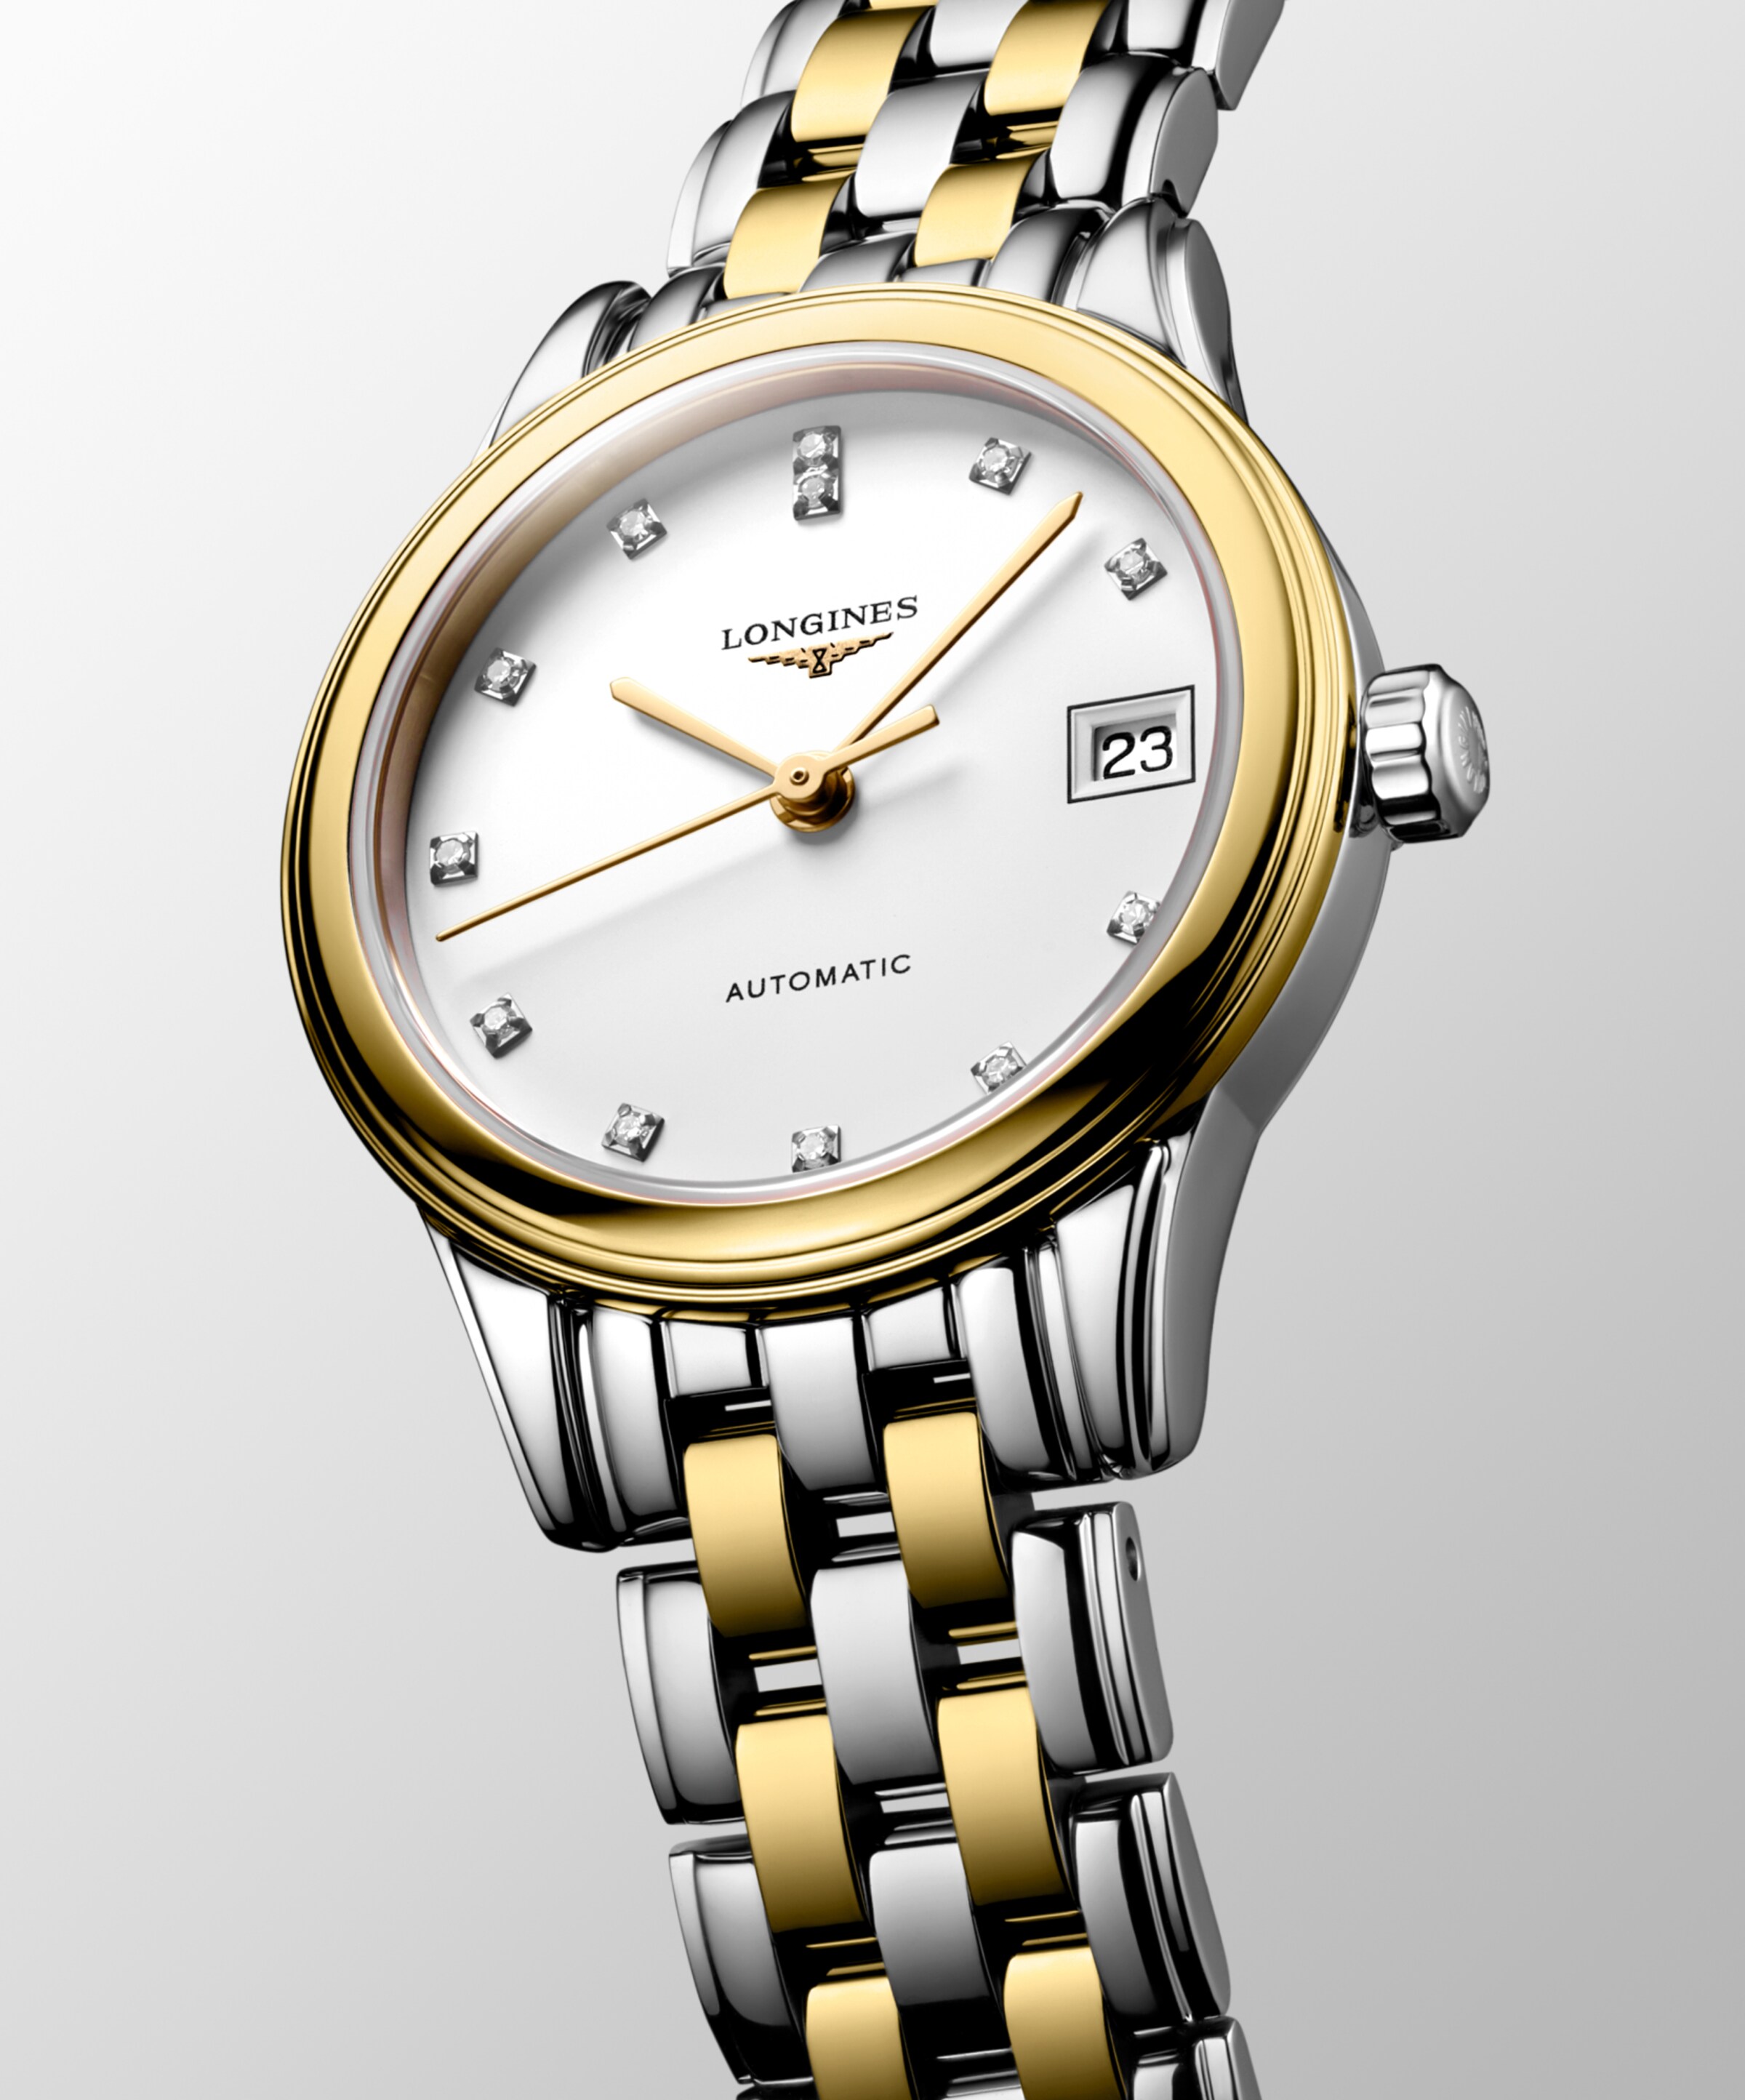 Longines FLAGSHIP Automatic Stainless steel and yellow PVD coating Watch - L4.274.3.27.7